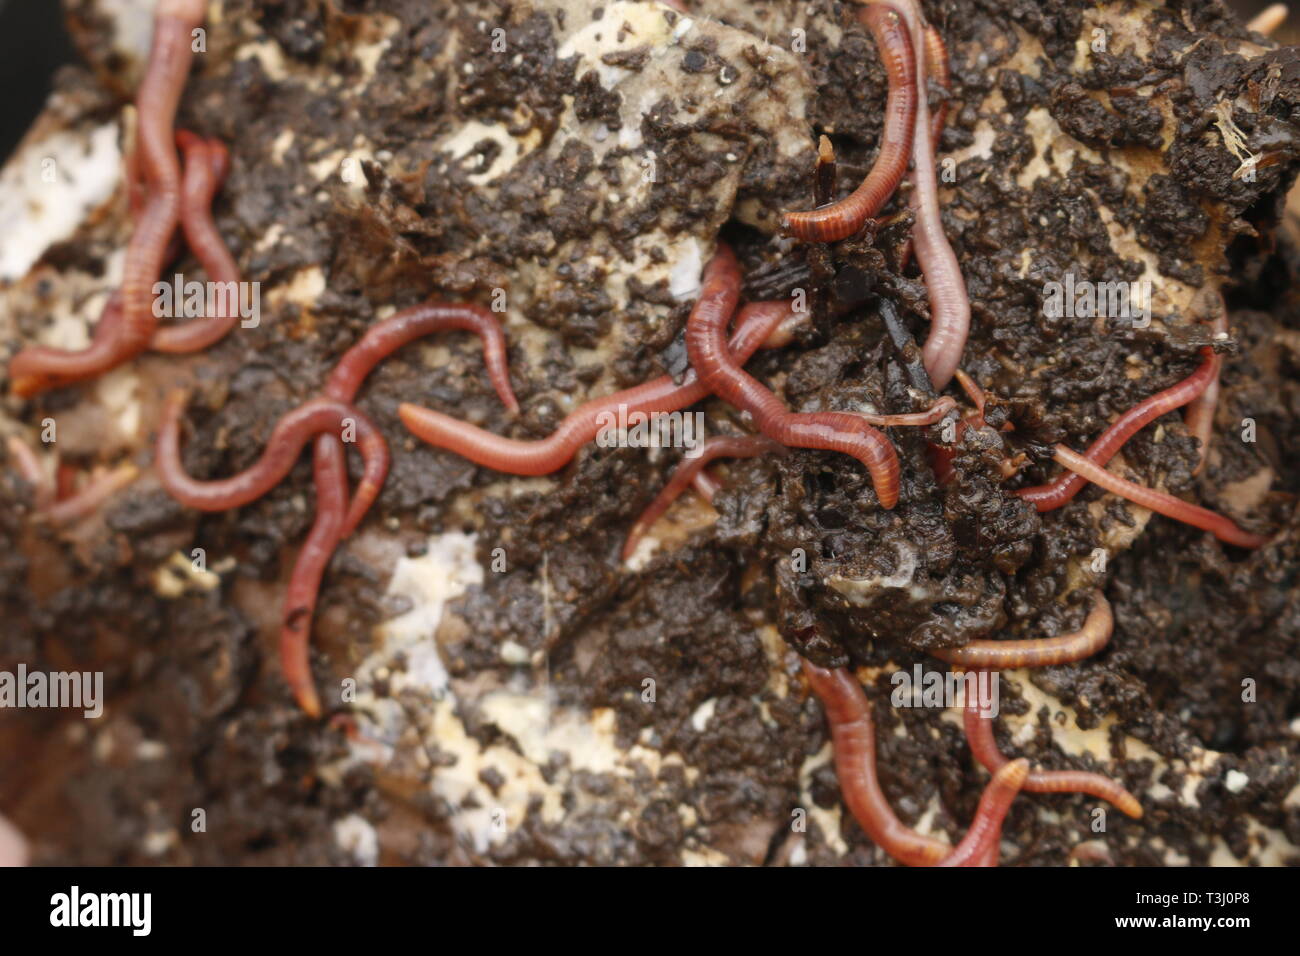 Red worms in compost or manure. Live bait for fishing Stock Photo